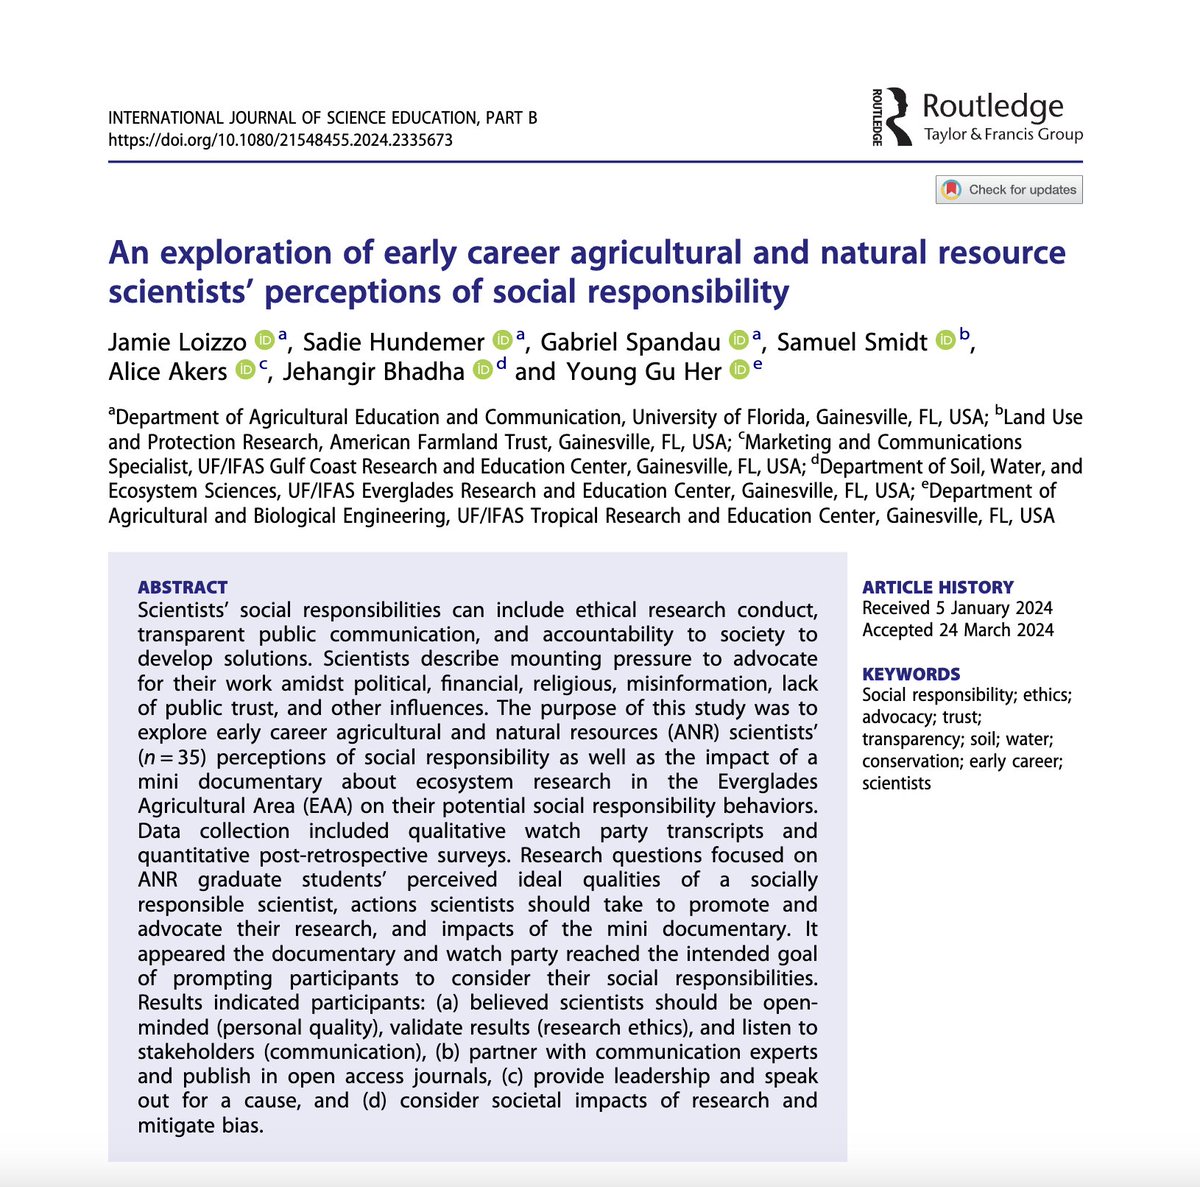 New publication! Learn how a mini-documentary impacted early career scientists' perceptions of social responsibility. tandfonline.com/eprint/YWFSZVB… Funded by: @CUAHSI Partners: @SoilWaterSci @UFSustainableAg @EvergladesREC #scicomm #Sustainability